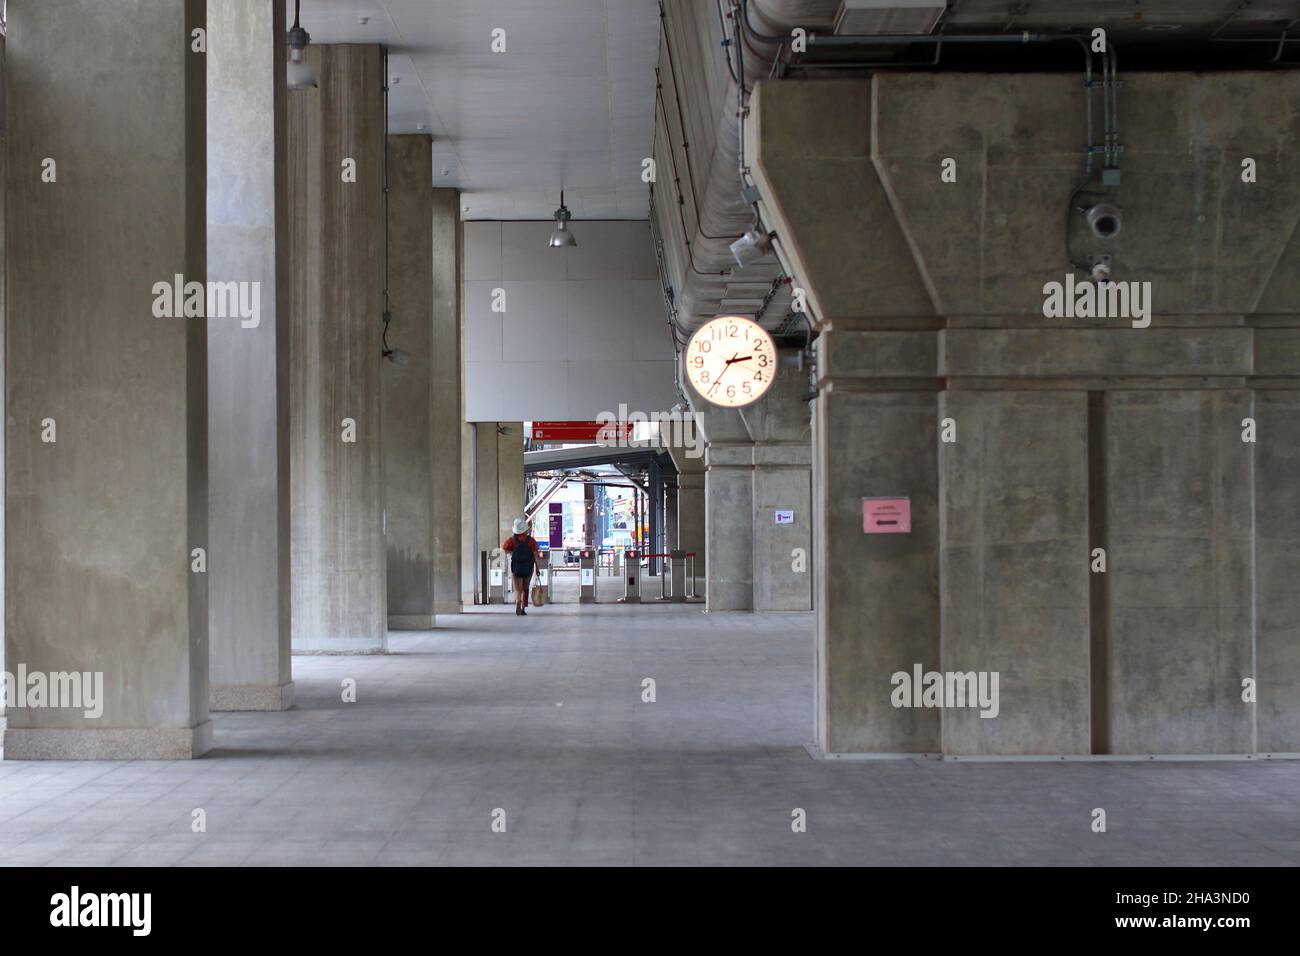 Pedestrian pathway or corridor or hallway between train station and other building. Stock Photo